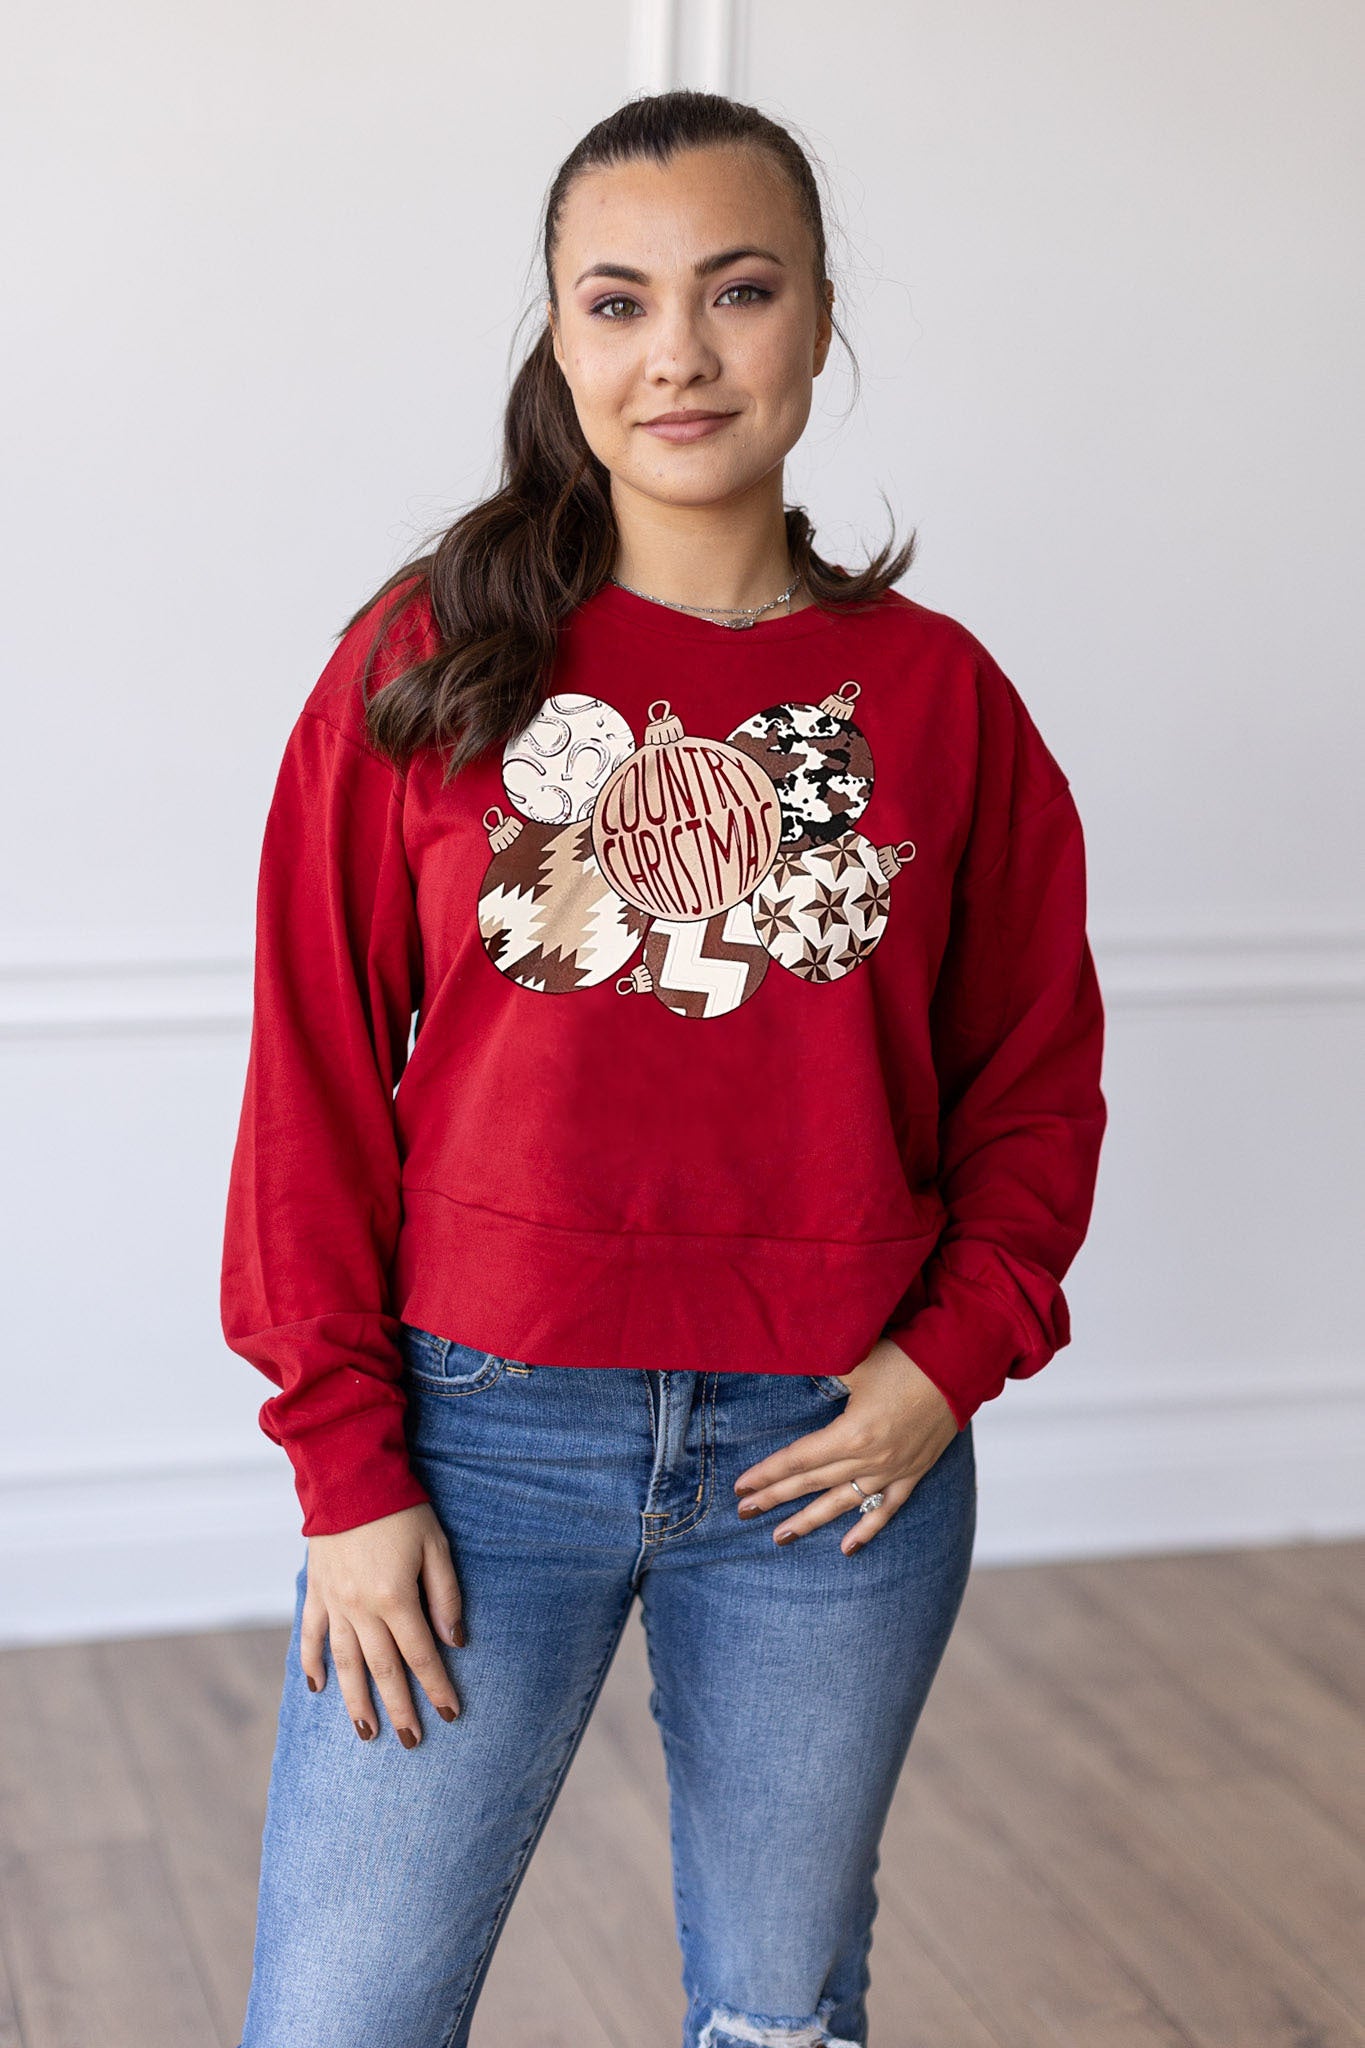 Country Christmas Ornaments on Strike Your Interest Red Crop Sweatshirt